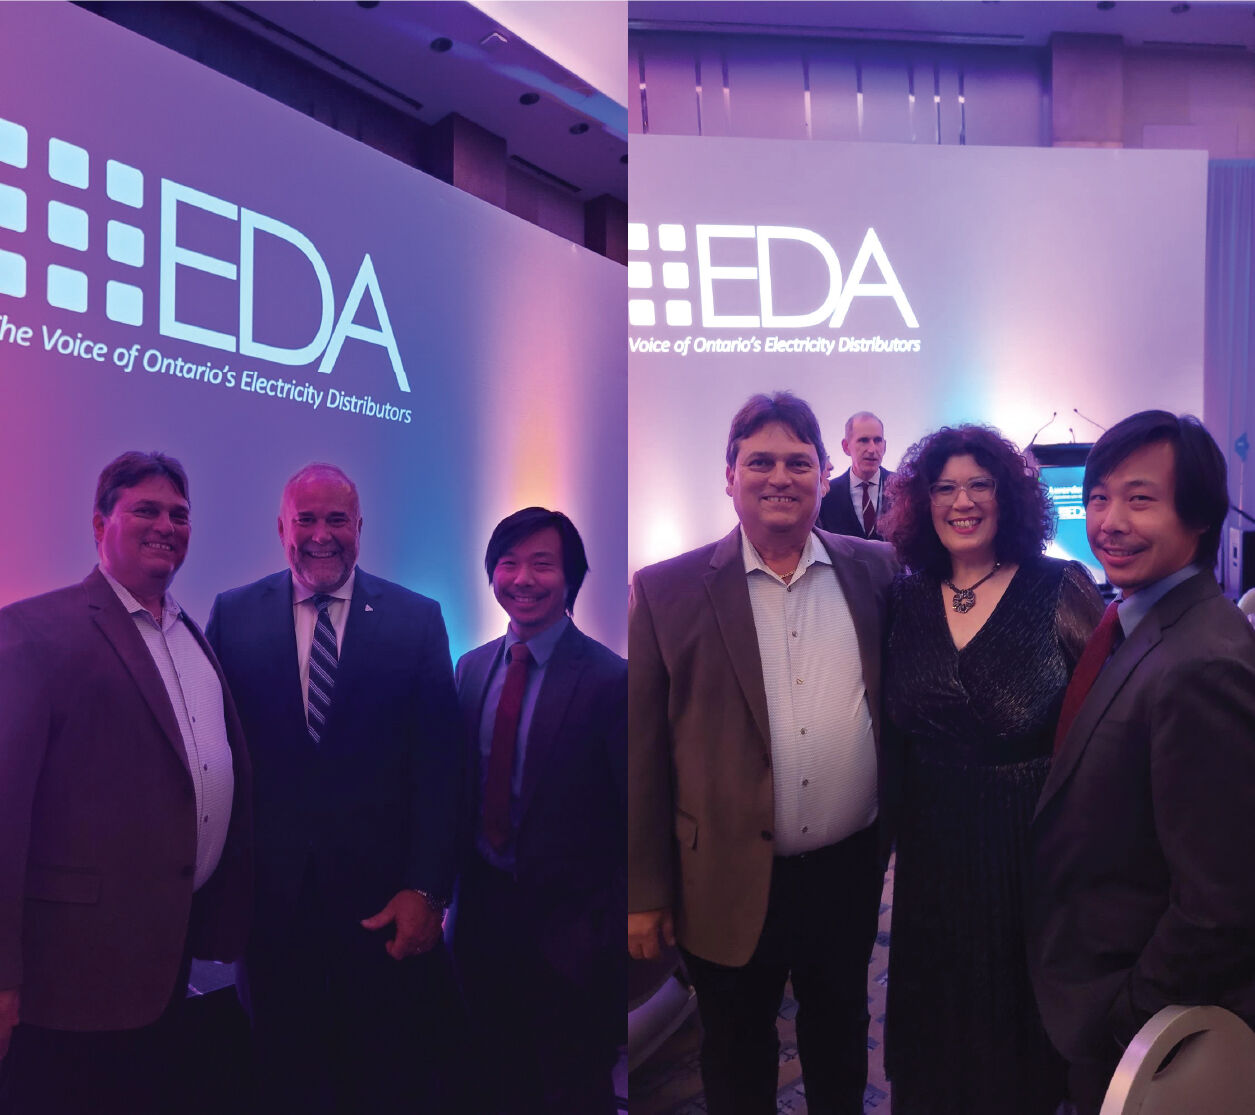 Andrew Lam appointed to the Commercial Member Steering Committee for the EDA in Ontario